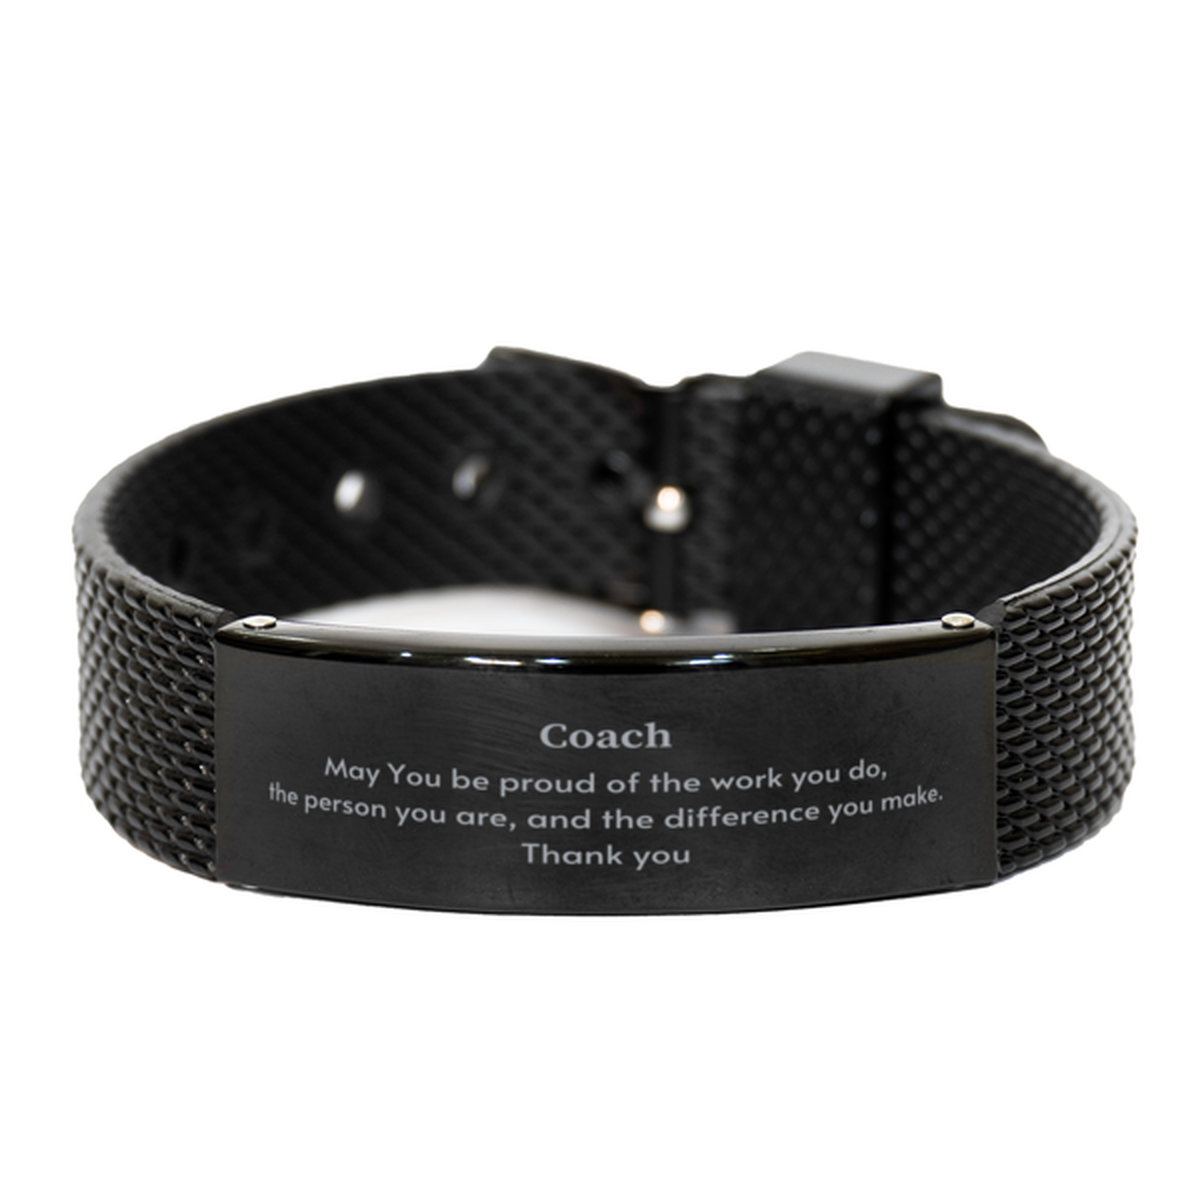 Heartwarming Black Shark Mesh Bracelet Retirement Coworkers Gifts for Coach, Coach May You be proud of the work you do, the person you are Gifts for Boss Men Women Friends